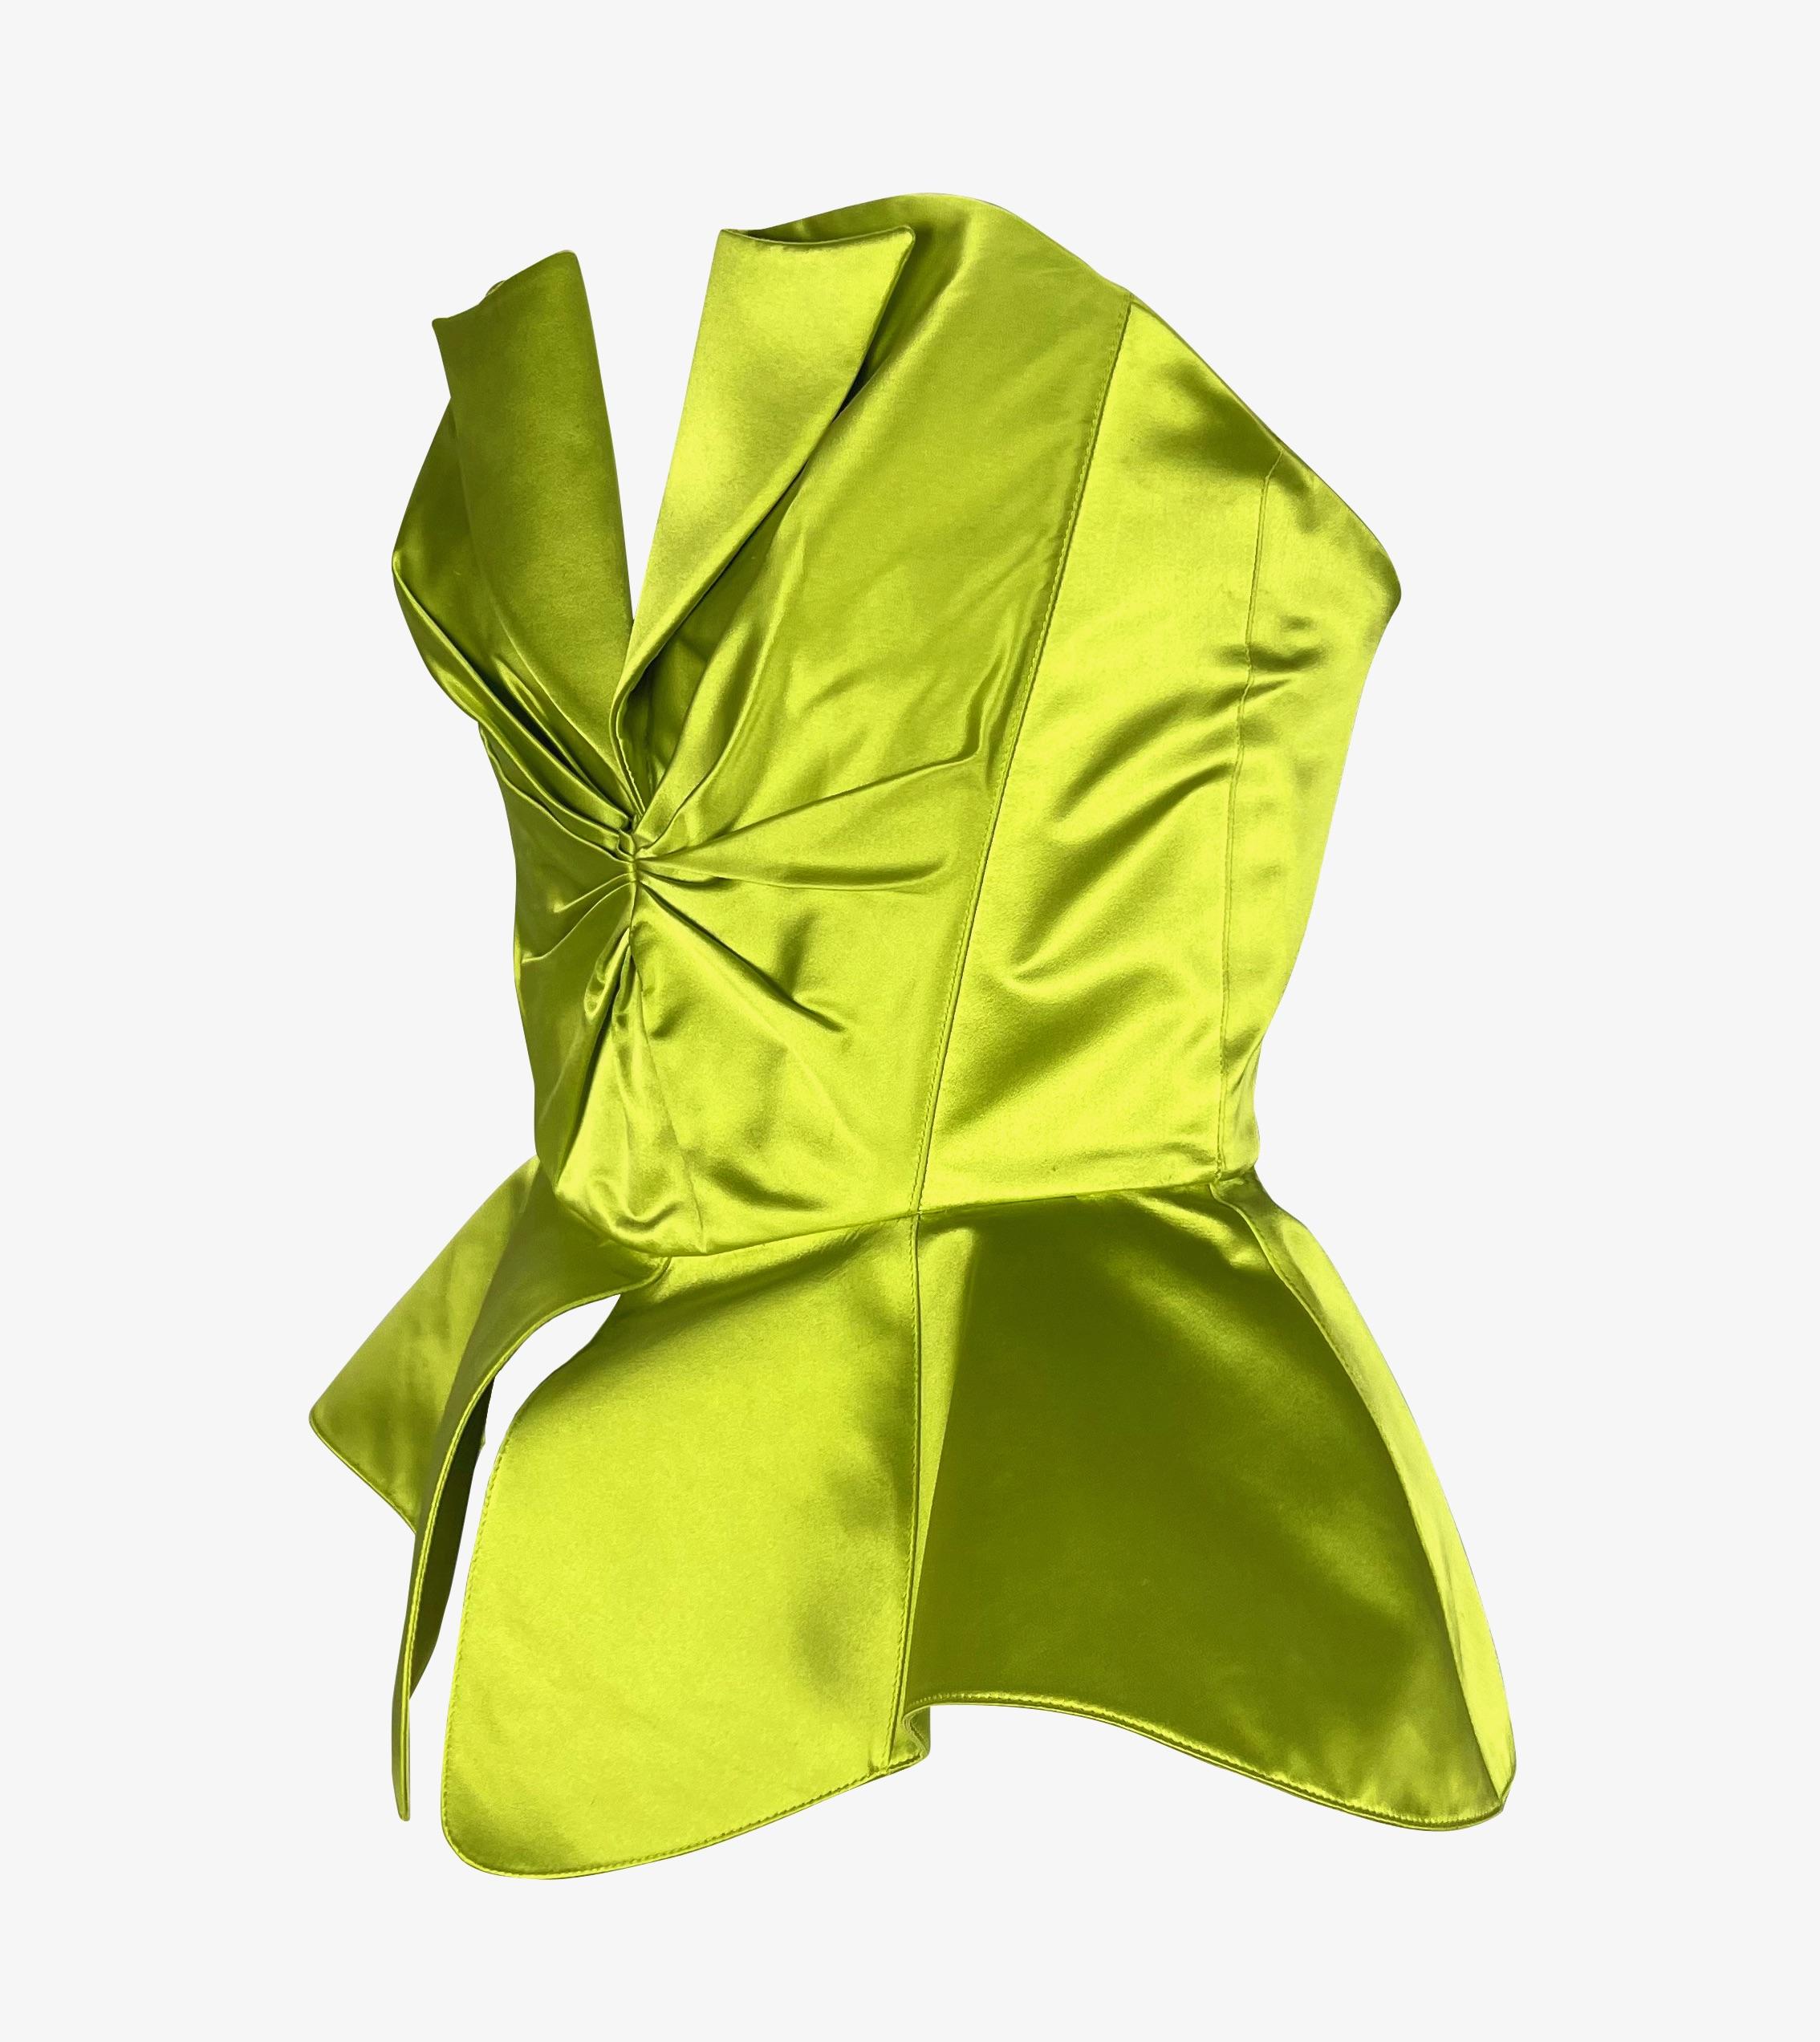 Presenting a chartreuse Thierry Mugler silk satin corset. This absolutely incredible silk corset features a cinched waist and an architectural peplum design. From 1995, this sleeveless strapless top features a v-neckline and lapel-style flaps. The